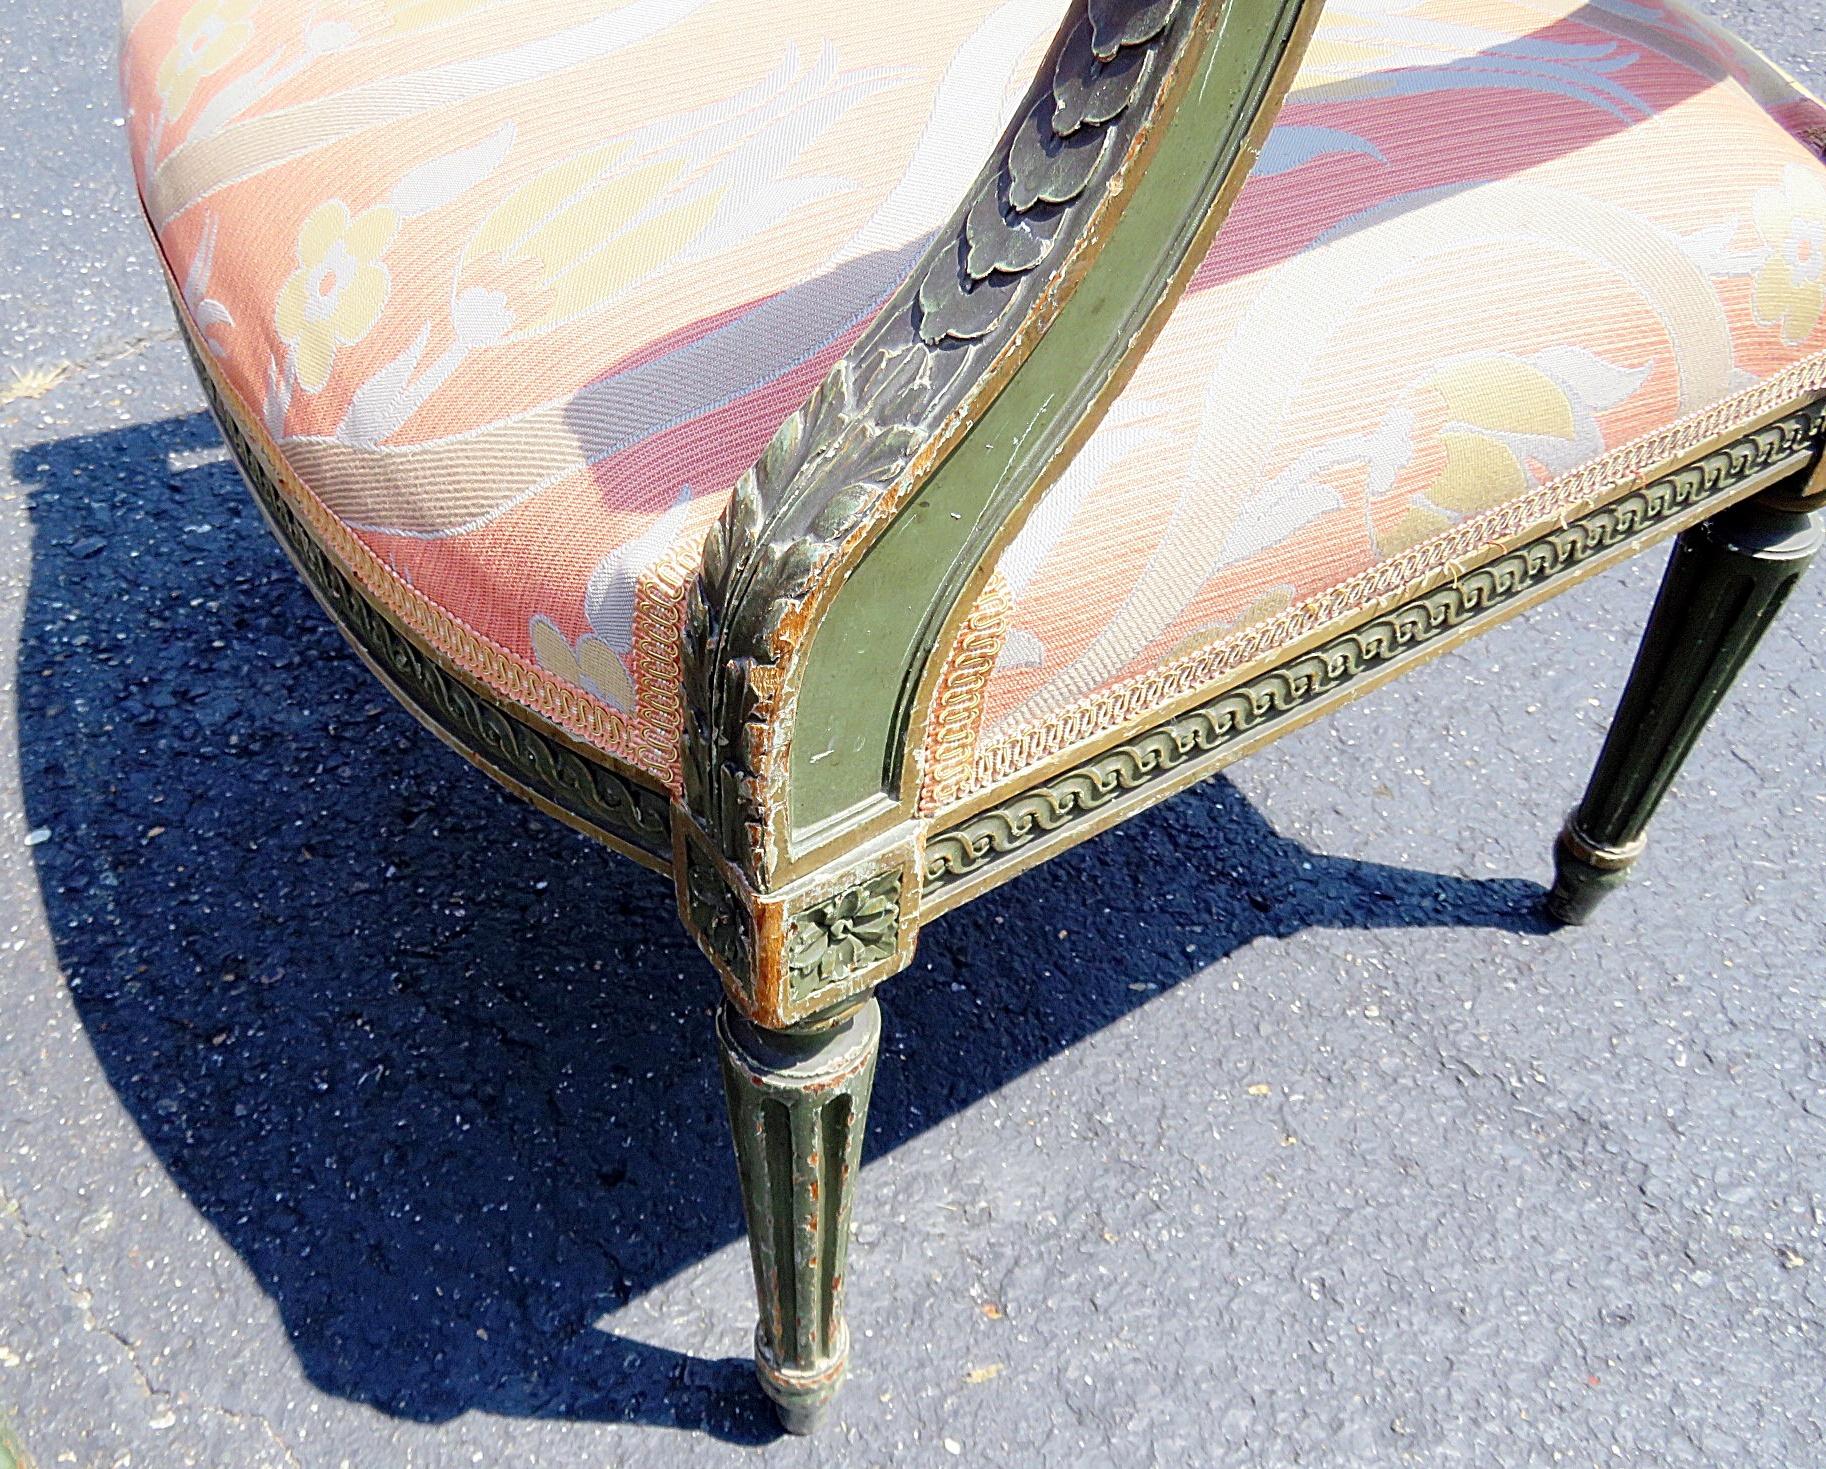 Upholstery Pair of Louis XVI Style Armchairs